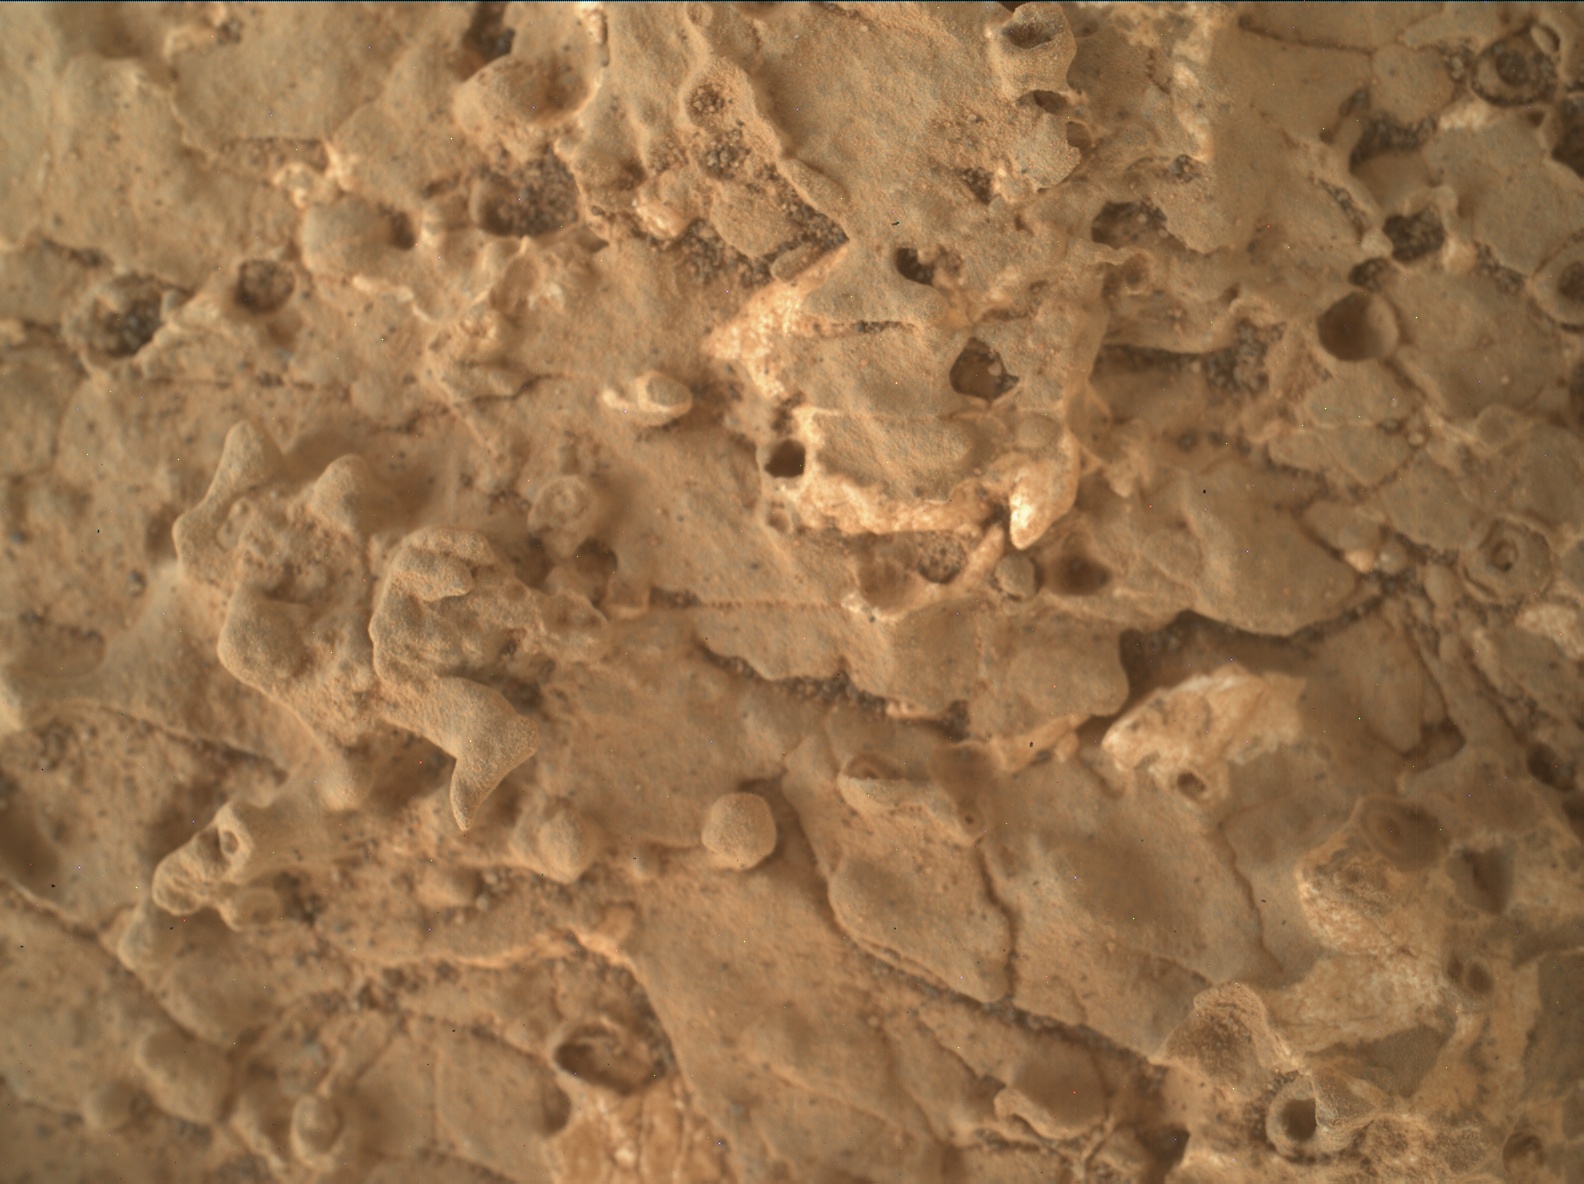 Nasa's Mars rover Curiosity acquired this image using its Mars Hand Lens Imager (MAHLI) on Sol 2660